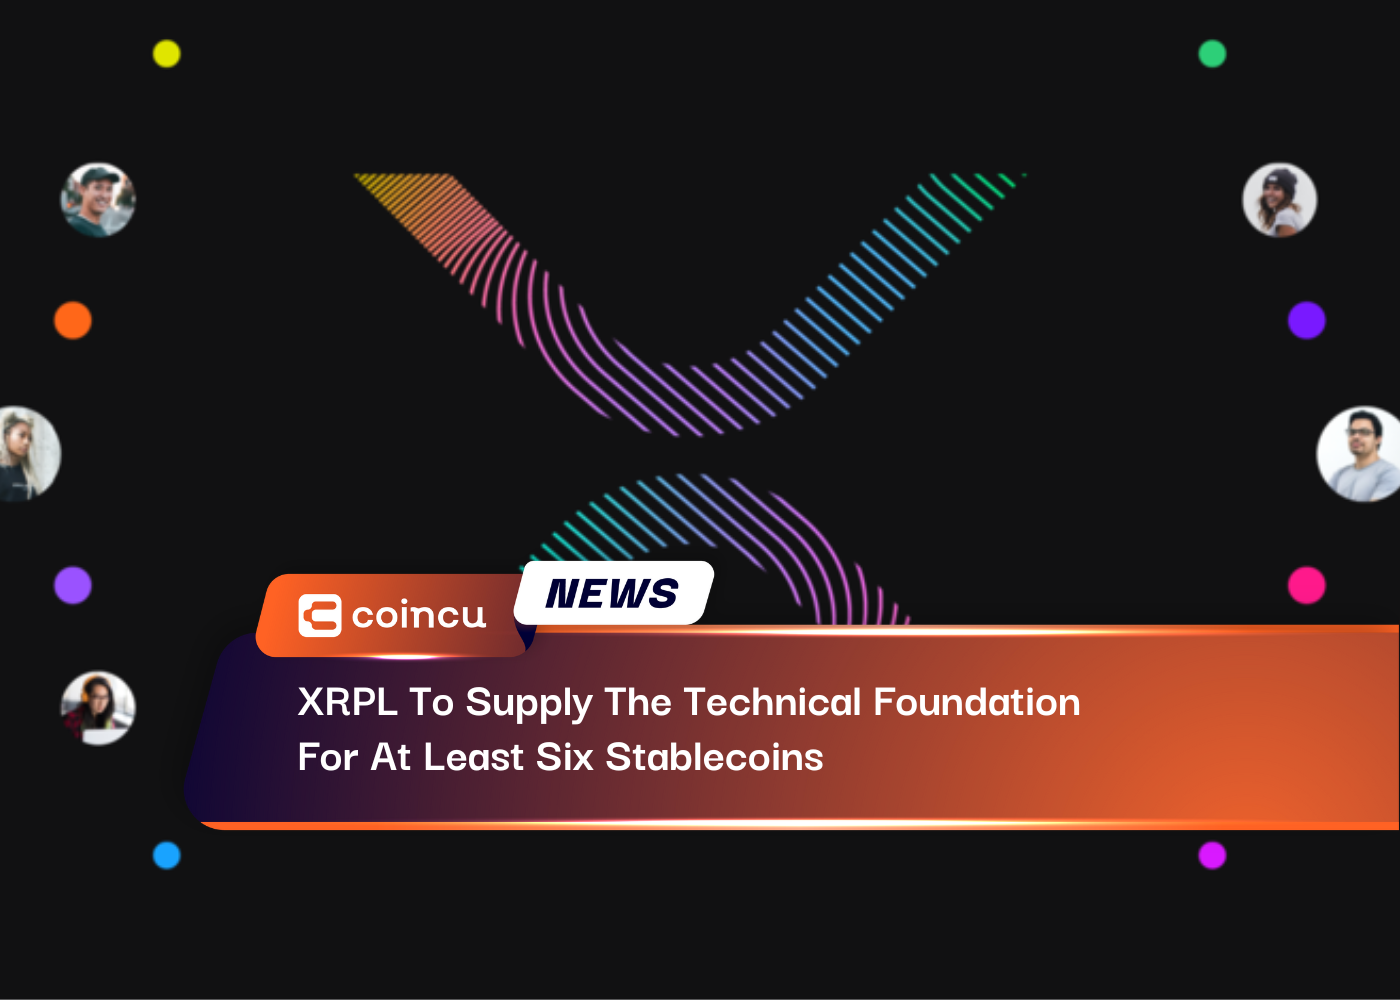 XRPL To Supply The Technical Foundation